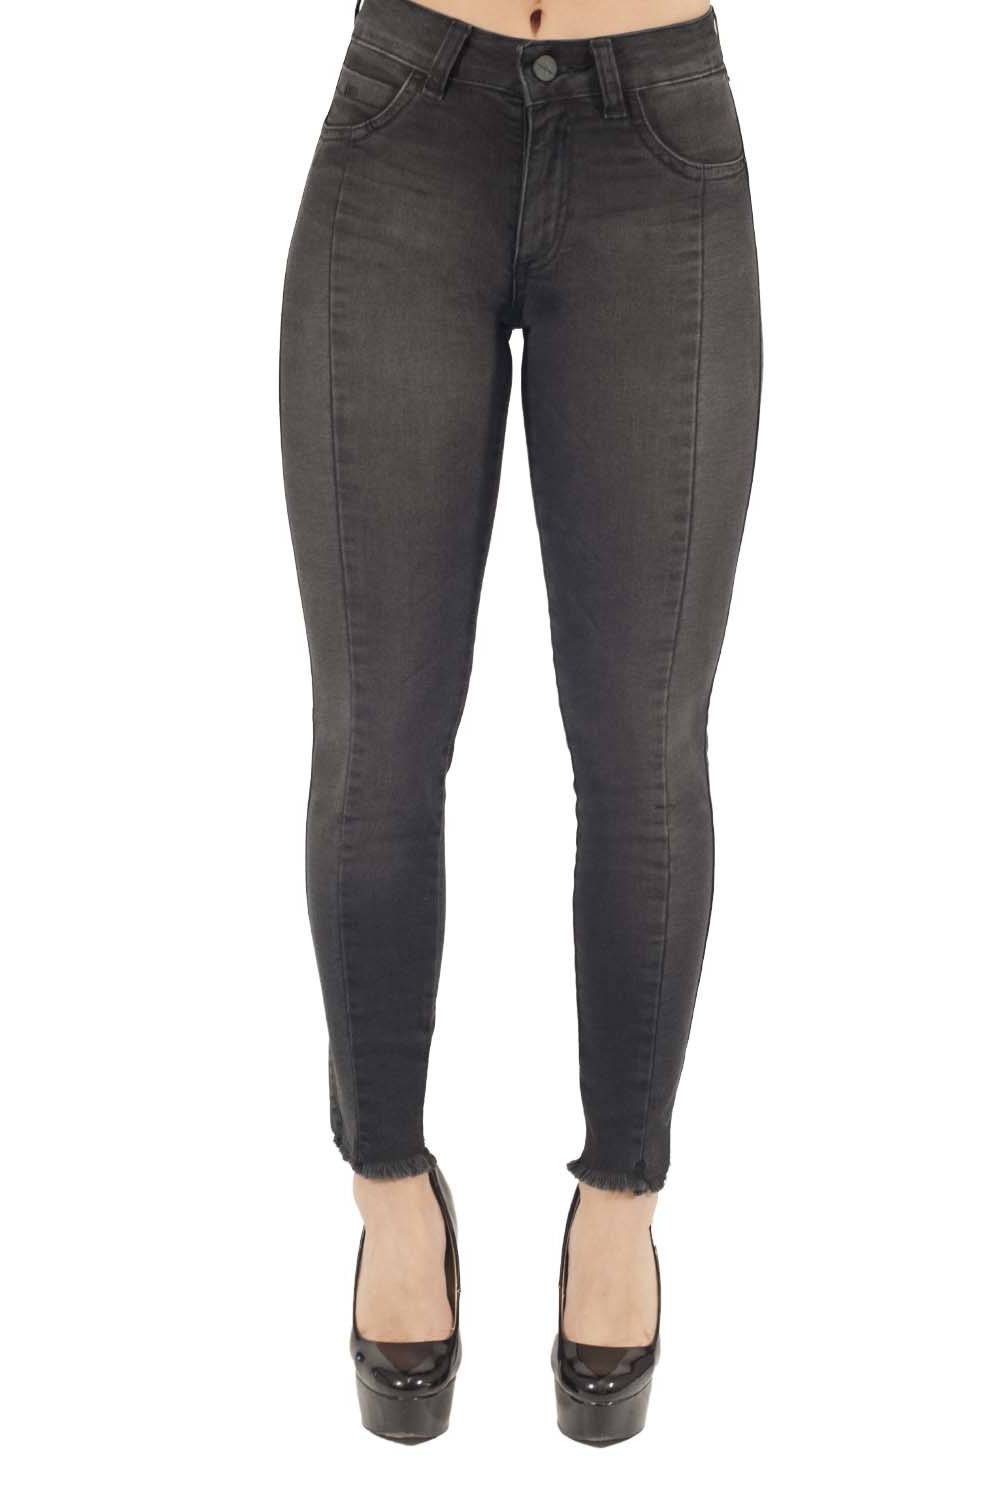 MOHICANO JEANS - Mohicano Jeans 9743